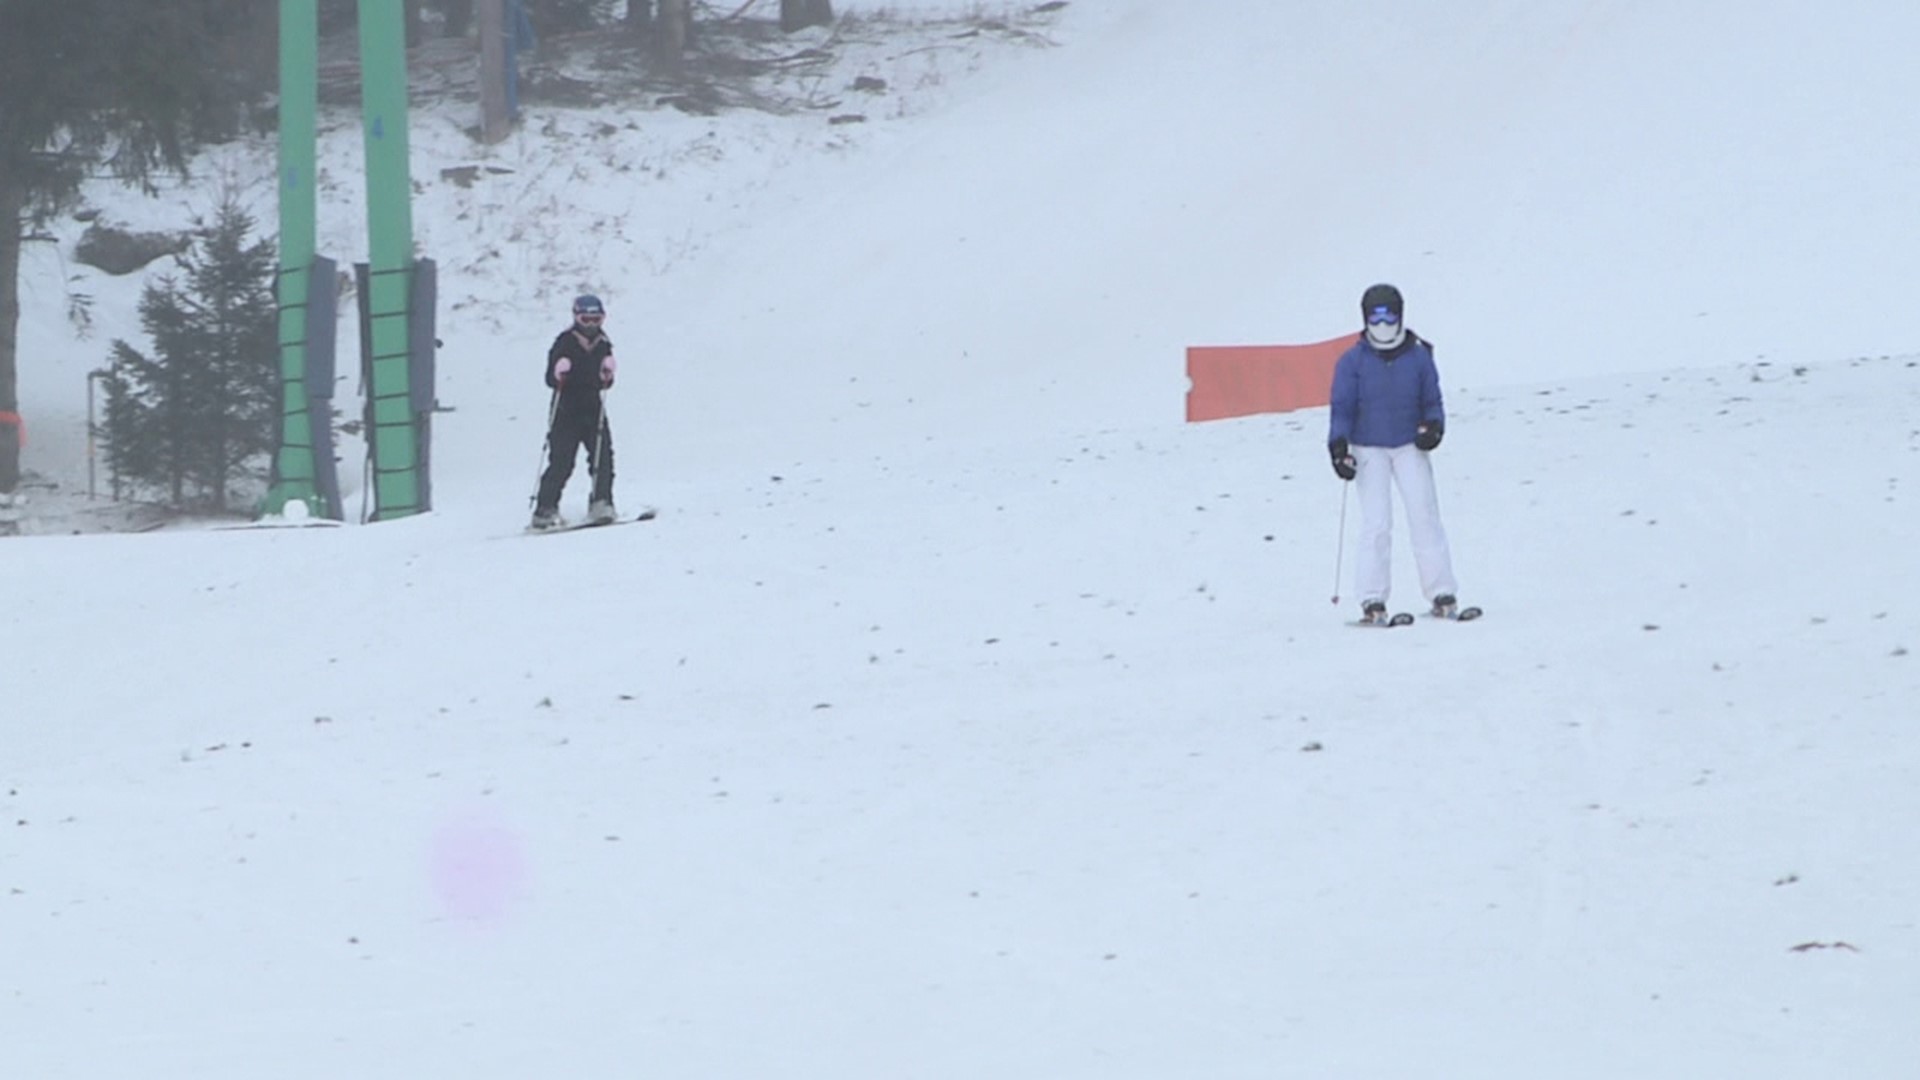 Skiers flocked to Elk Mountain Friday night as the temperatures plunged below freezing.